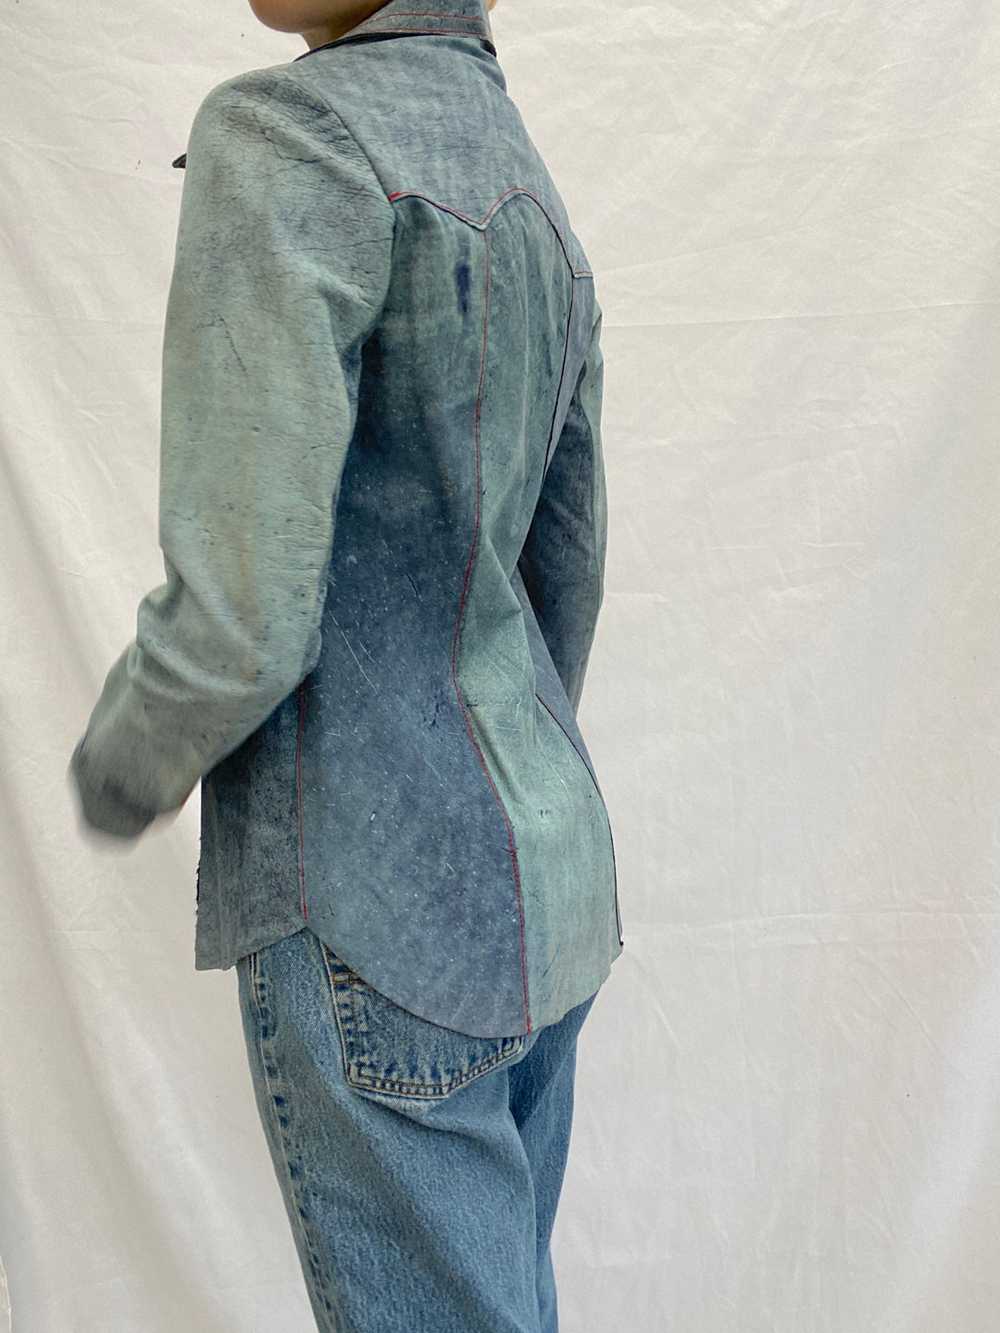 Baby Blue Suede Jacket Shirt with Red Stitching - image 5